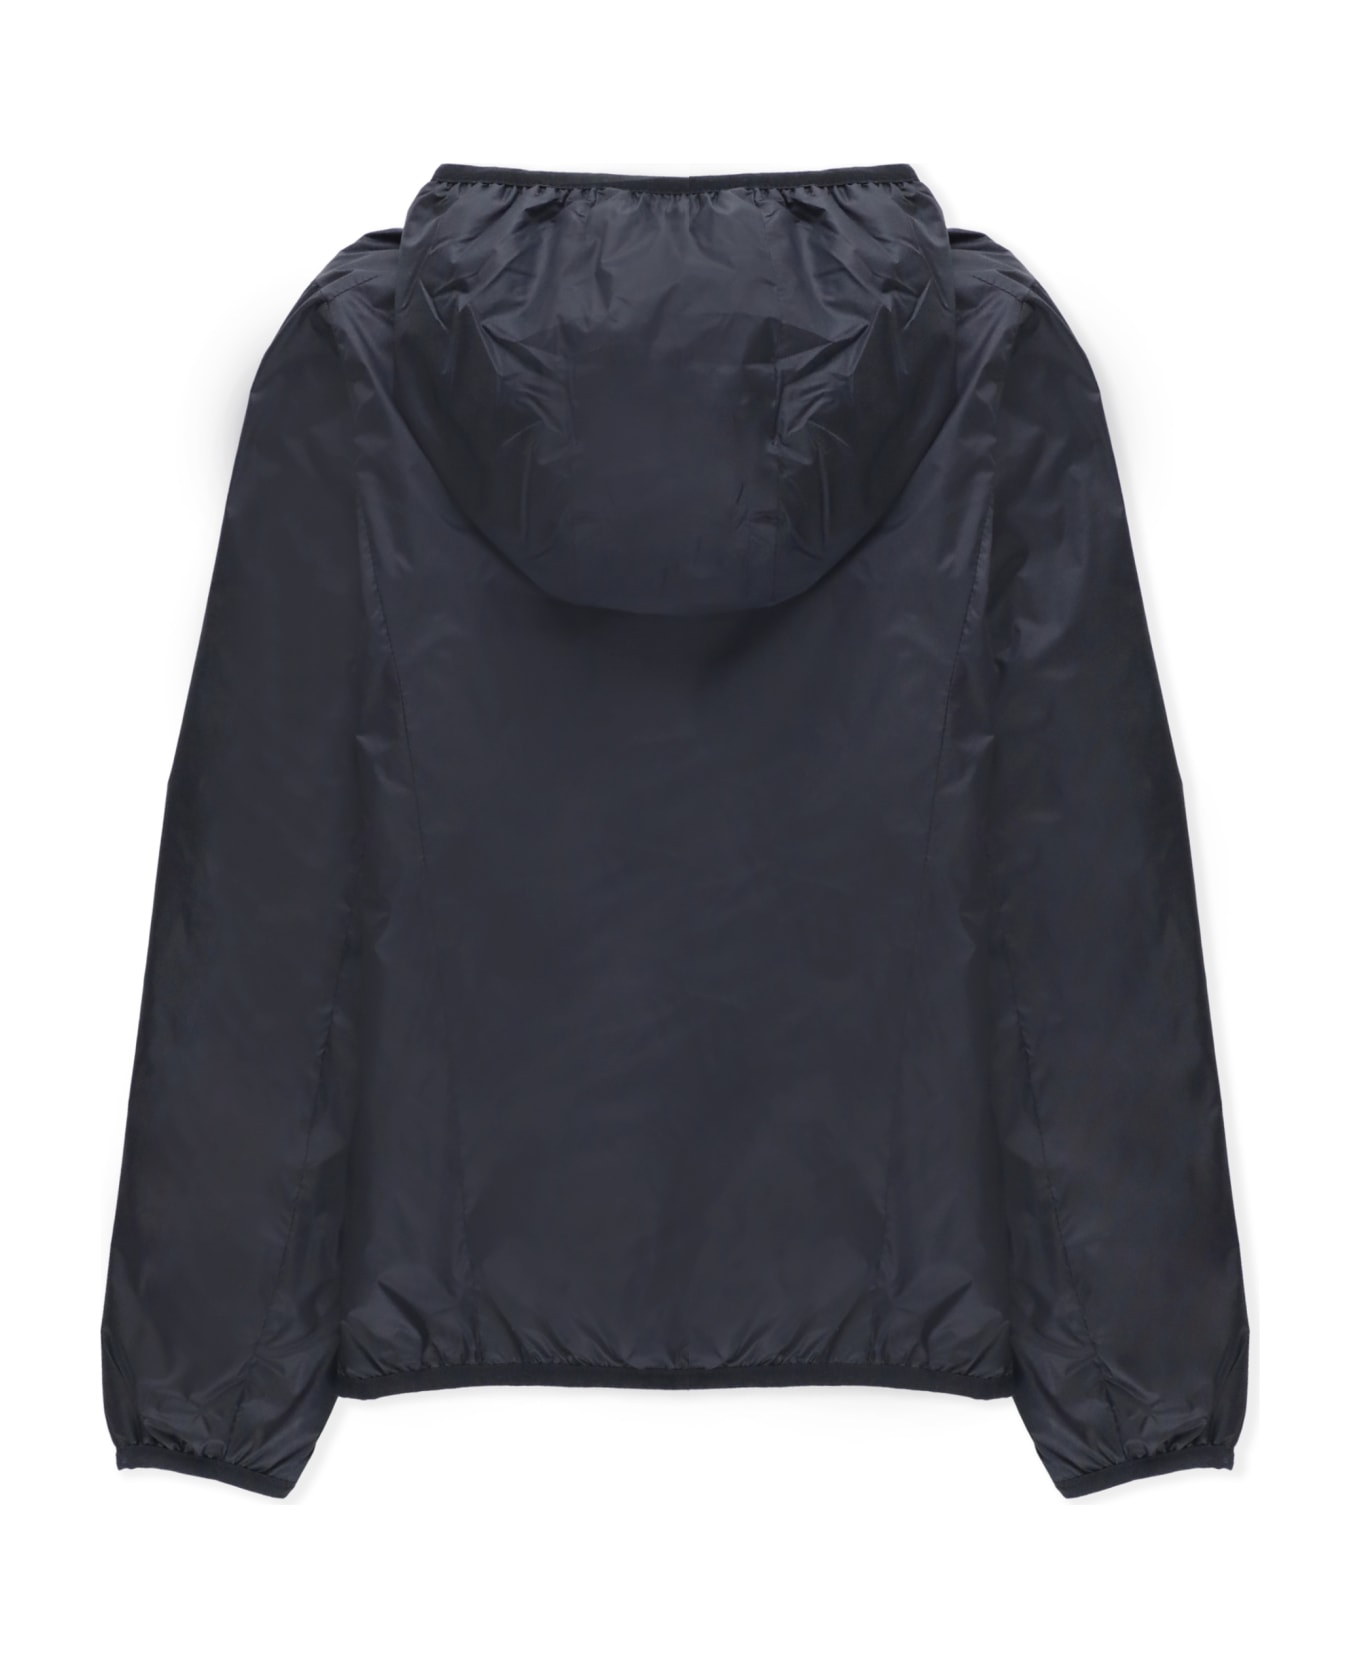 Save the Duck Shilo Padded Jacket - Black